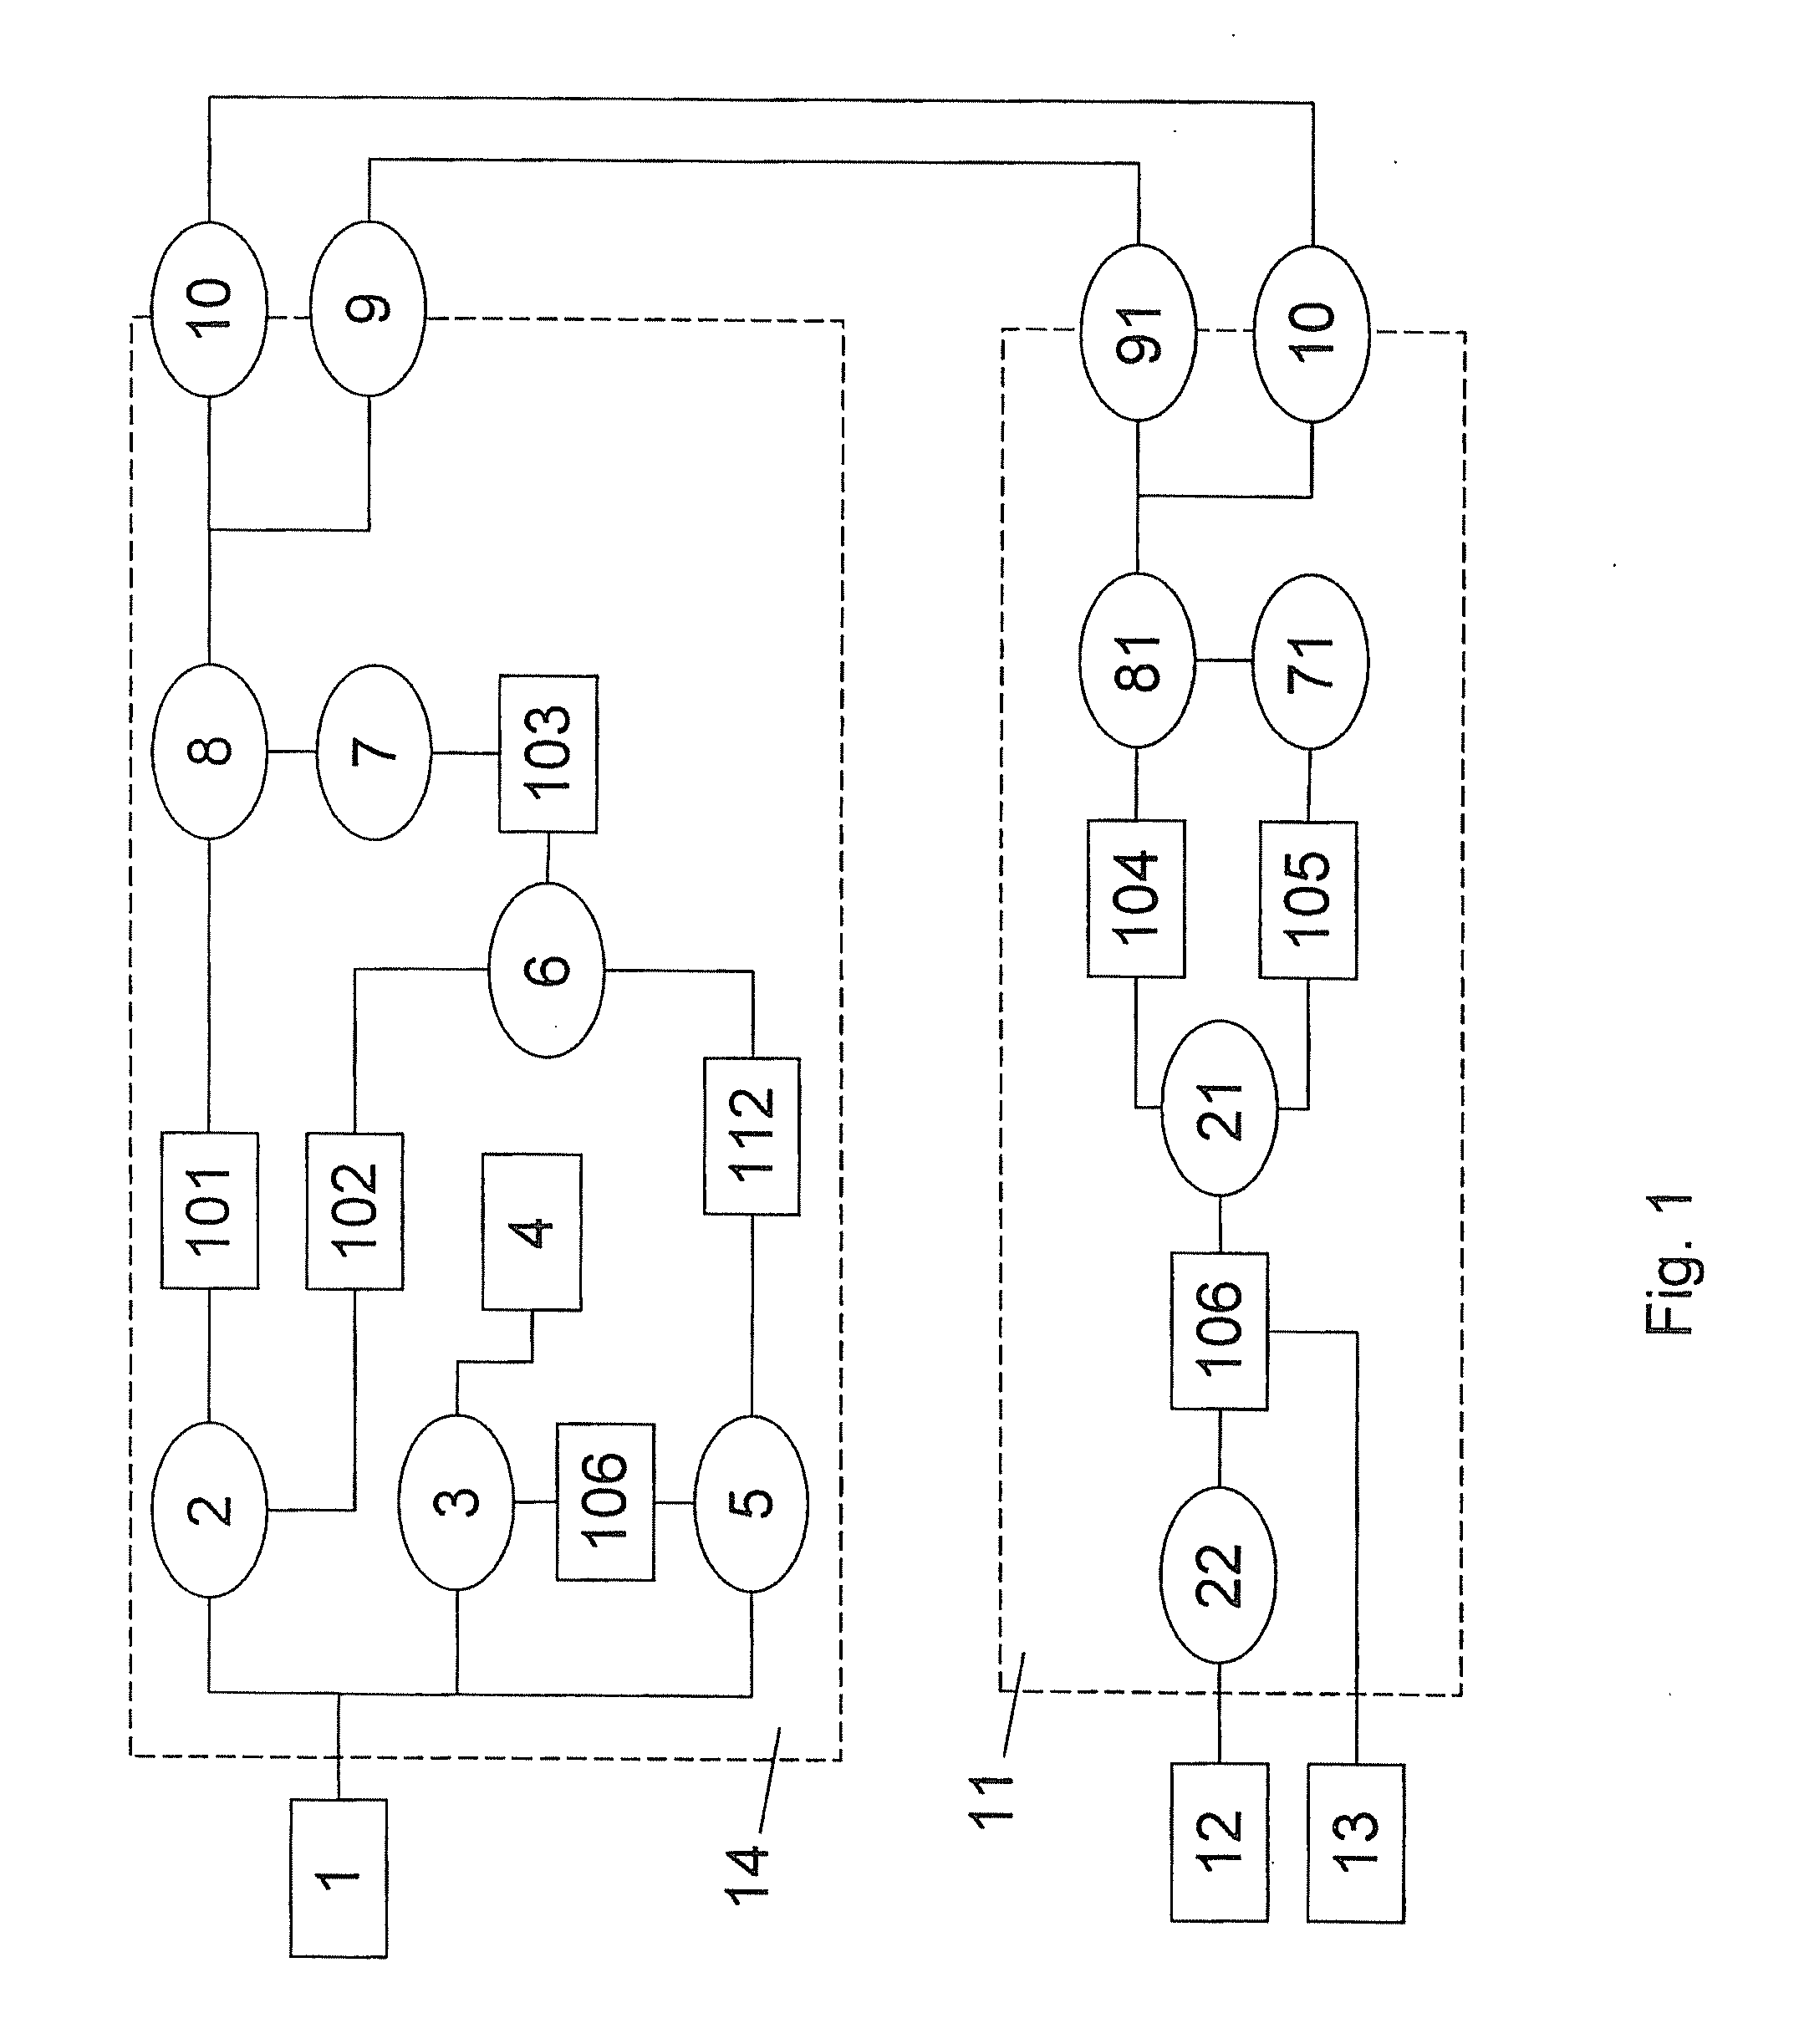 Method and system for the secured distribution of audiovisual data by transaction marking